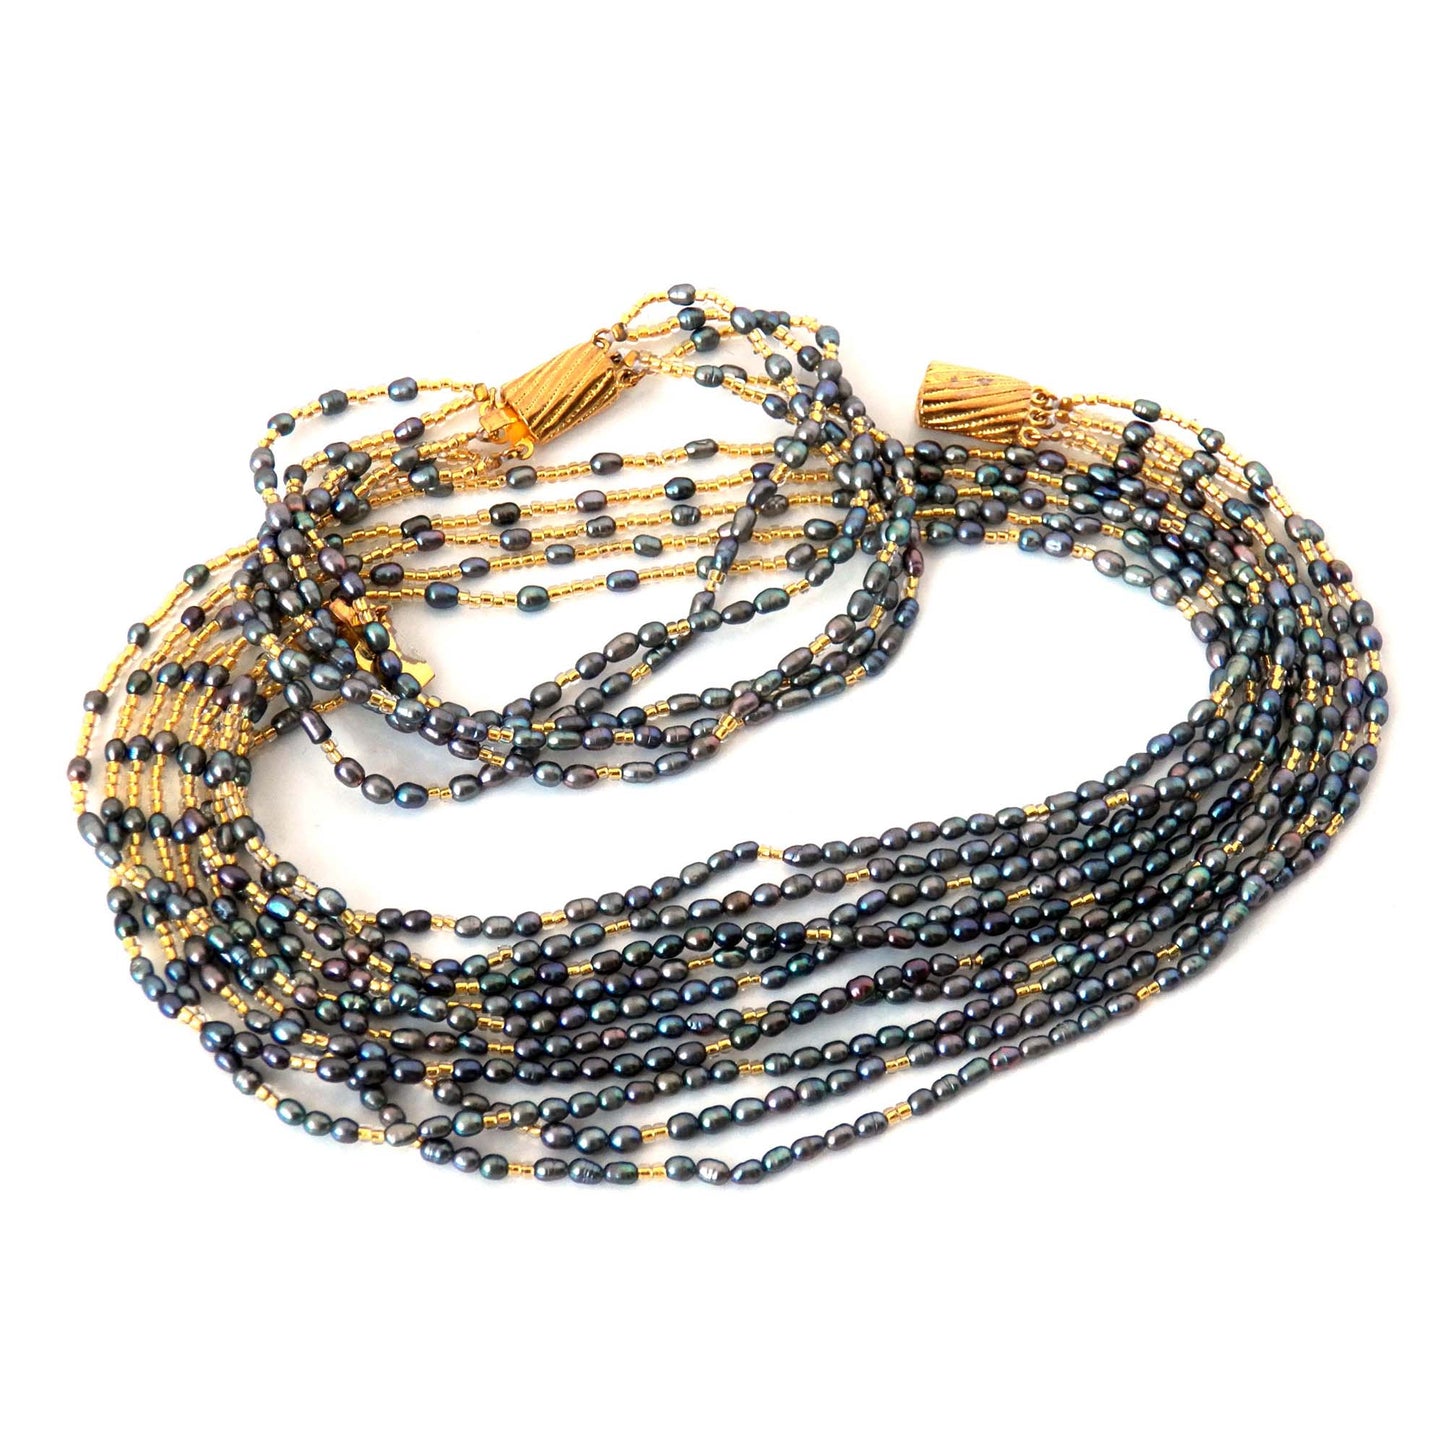 Multi Strand Freshwater Pearl Necklace and Bracelet, Gilt Sterling Silver Japanese Jewelry Set